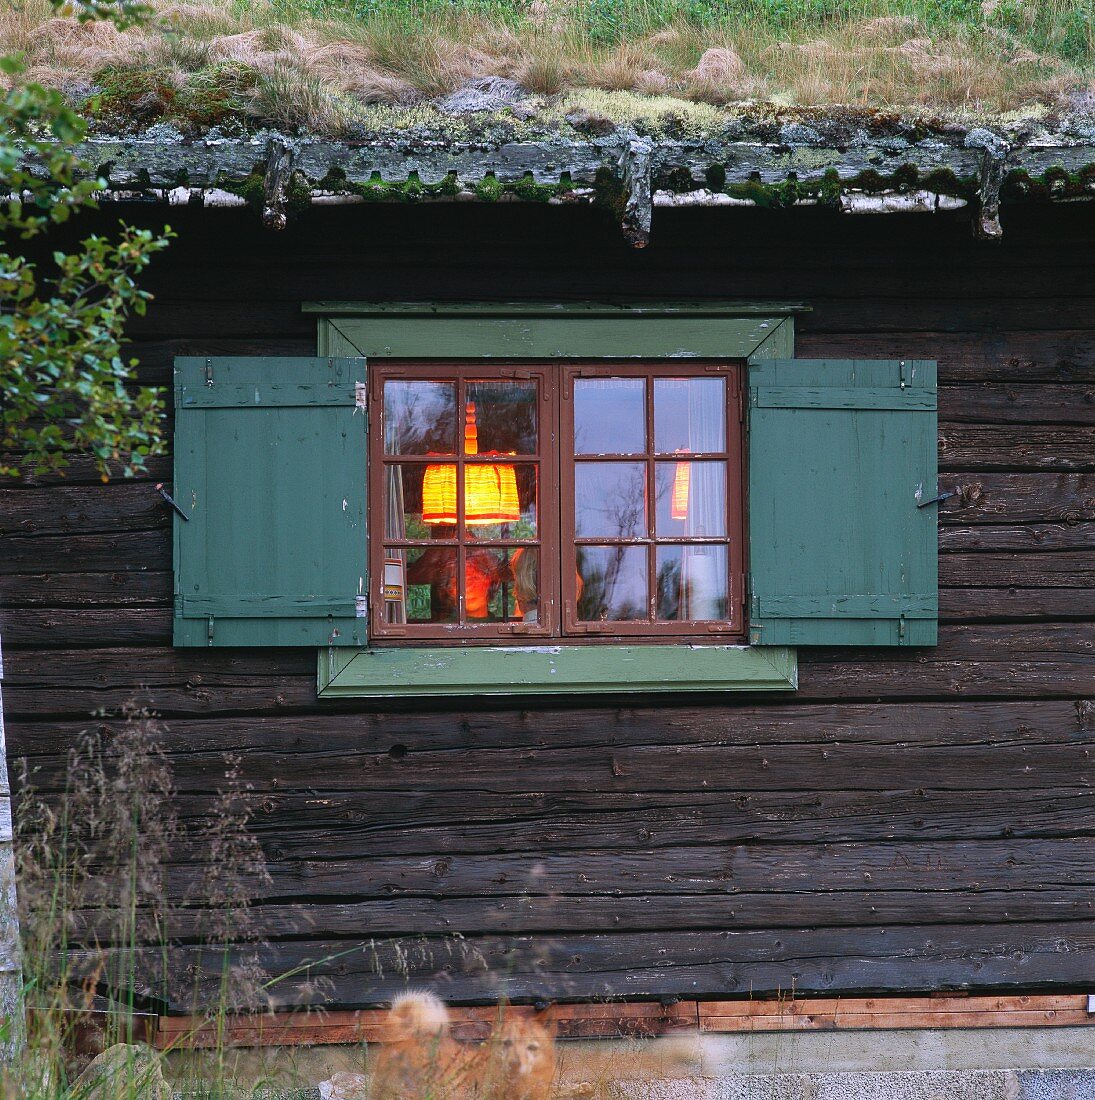 View of illuminated window of wooden house with green roof